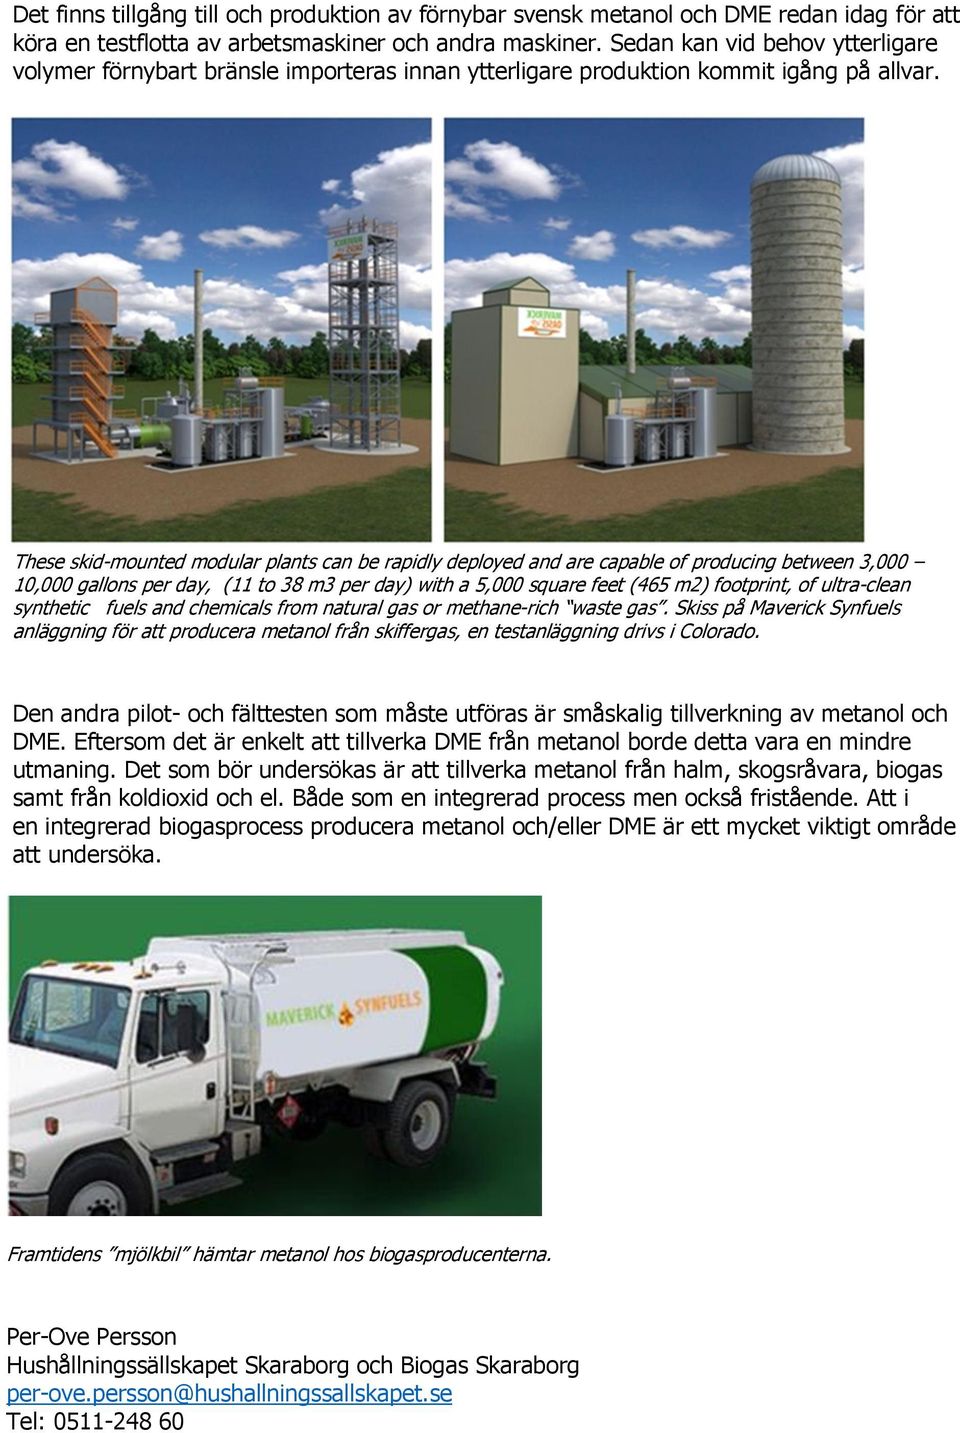 These skid-mounted modular plants can be rapidly deployed and are capable of producing between 3,000 10,000 gallons per day, (11 to 38 m3 per day) with a 5,000 square feet (465 m2) footprint, of